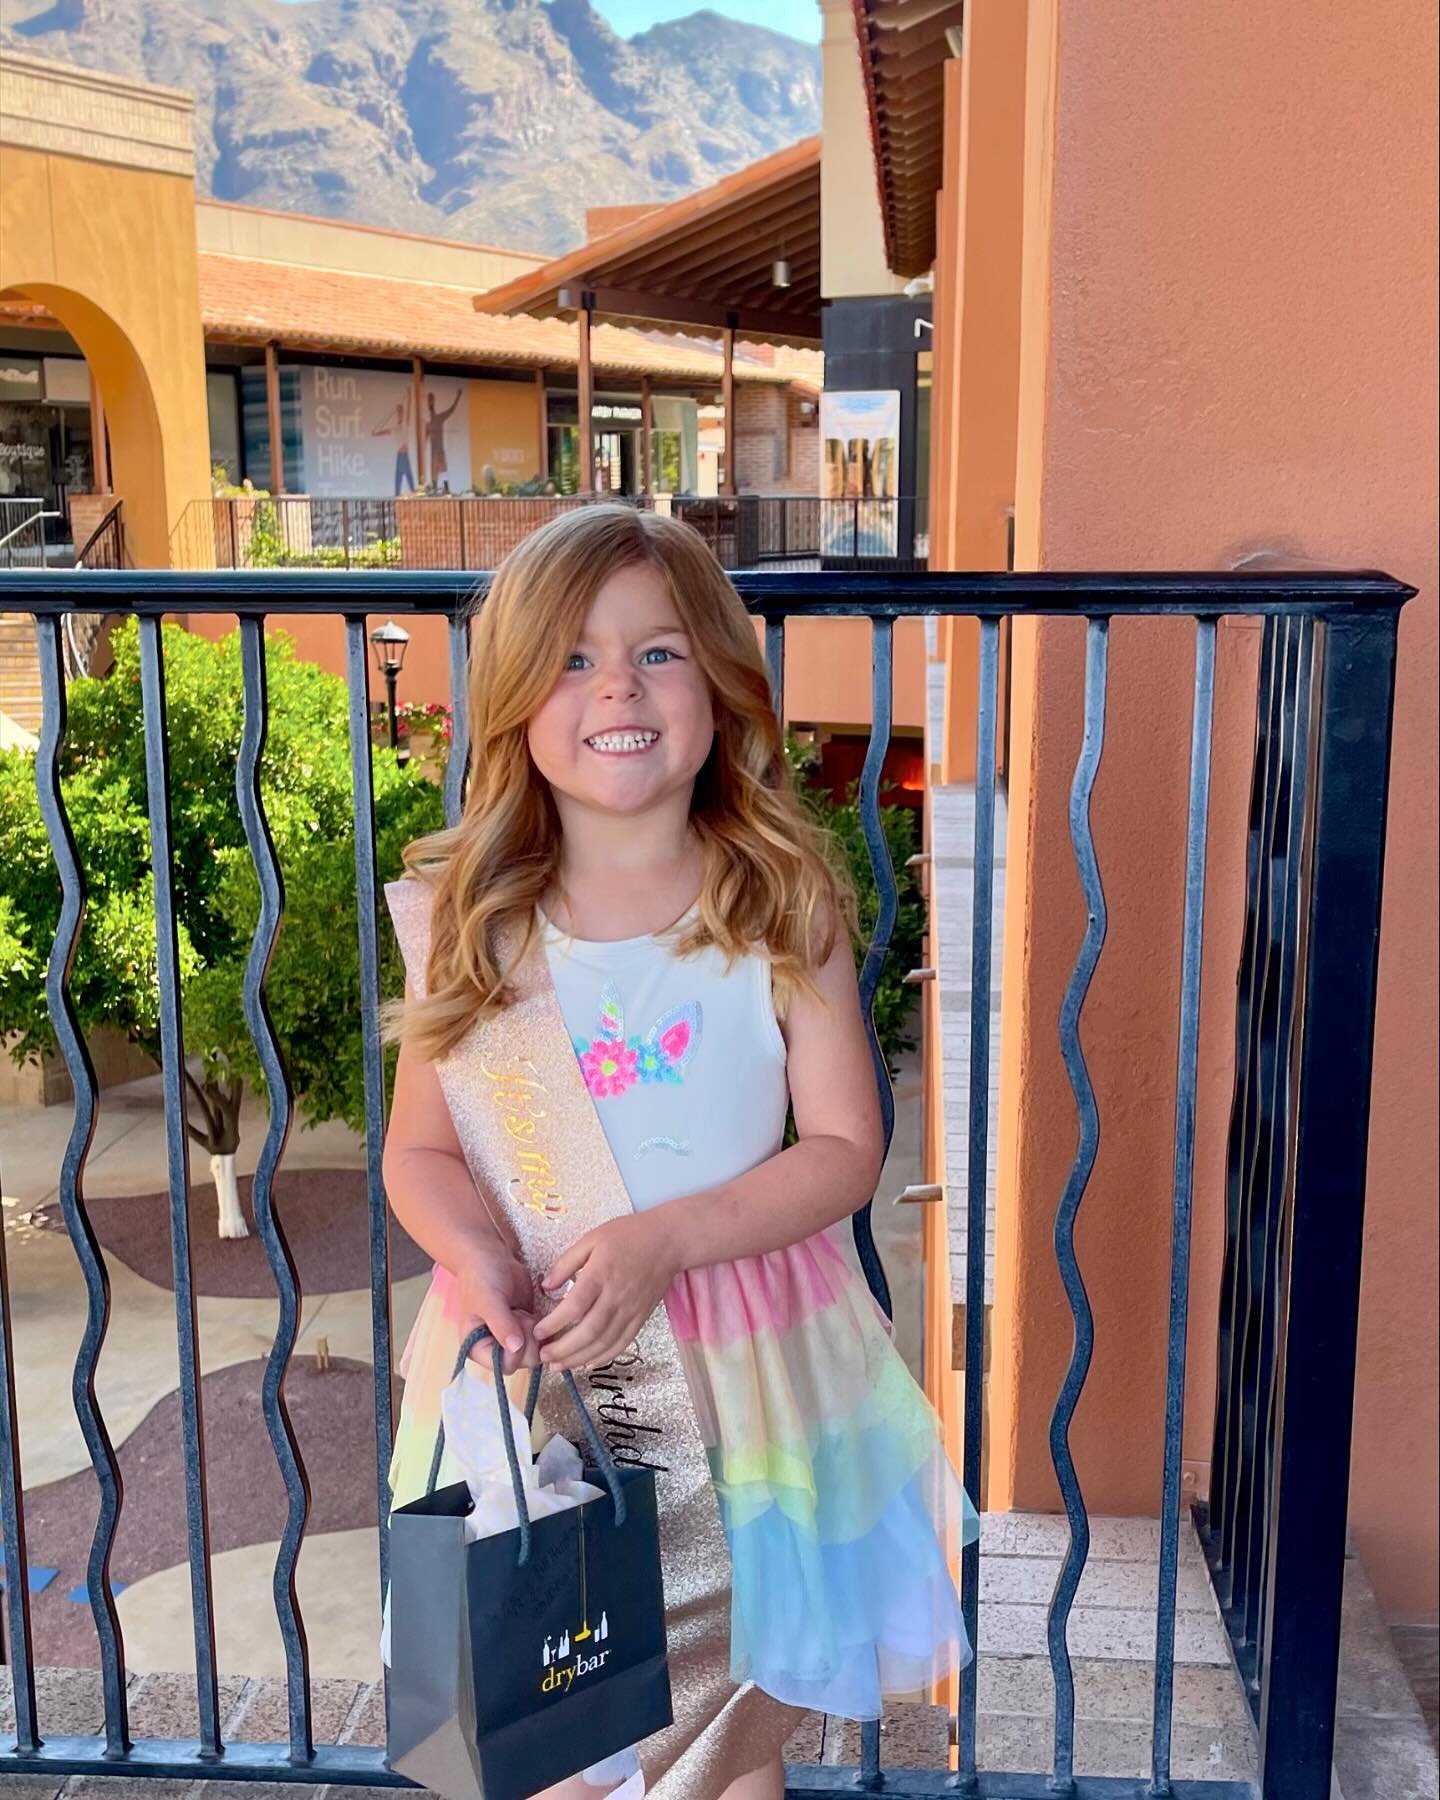 Happy 5th Birthday Hadley! Thank you so much for spending your day with us! We hope all of your birthday wishes come true! Love, Drybar Tucson 💛